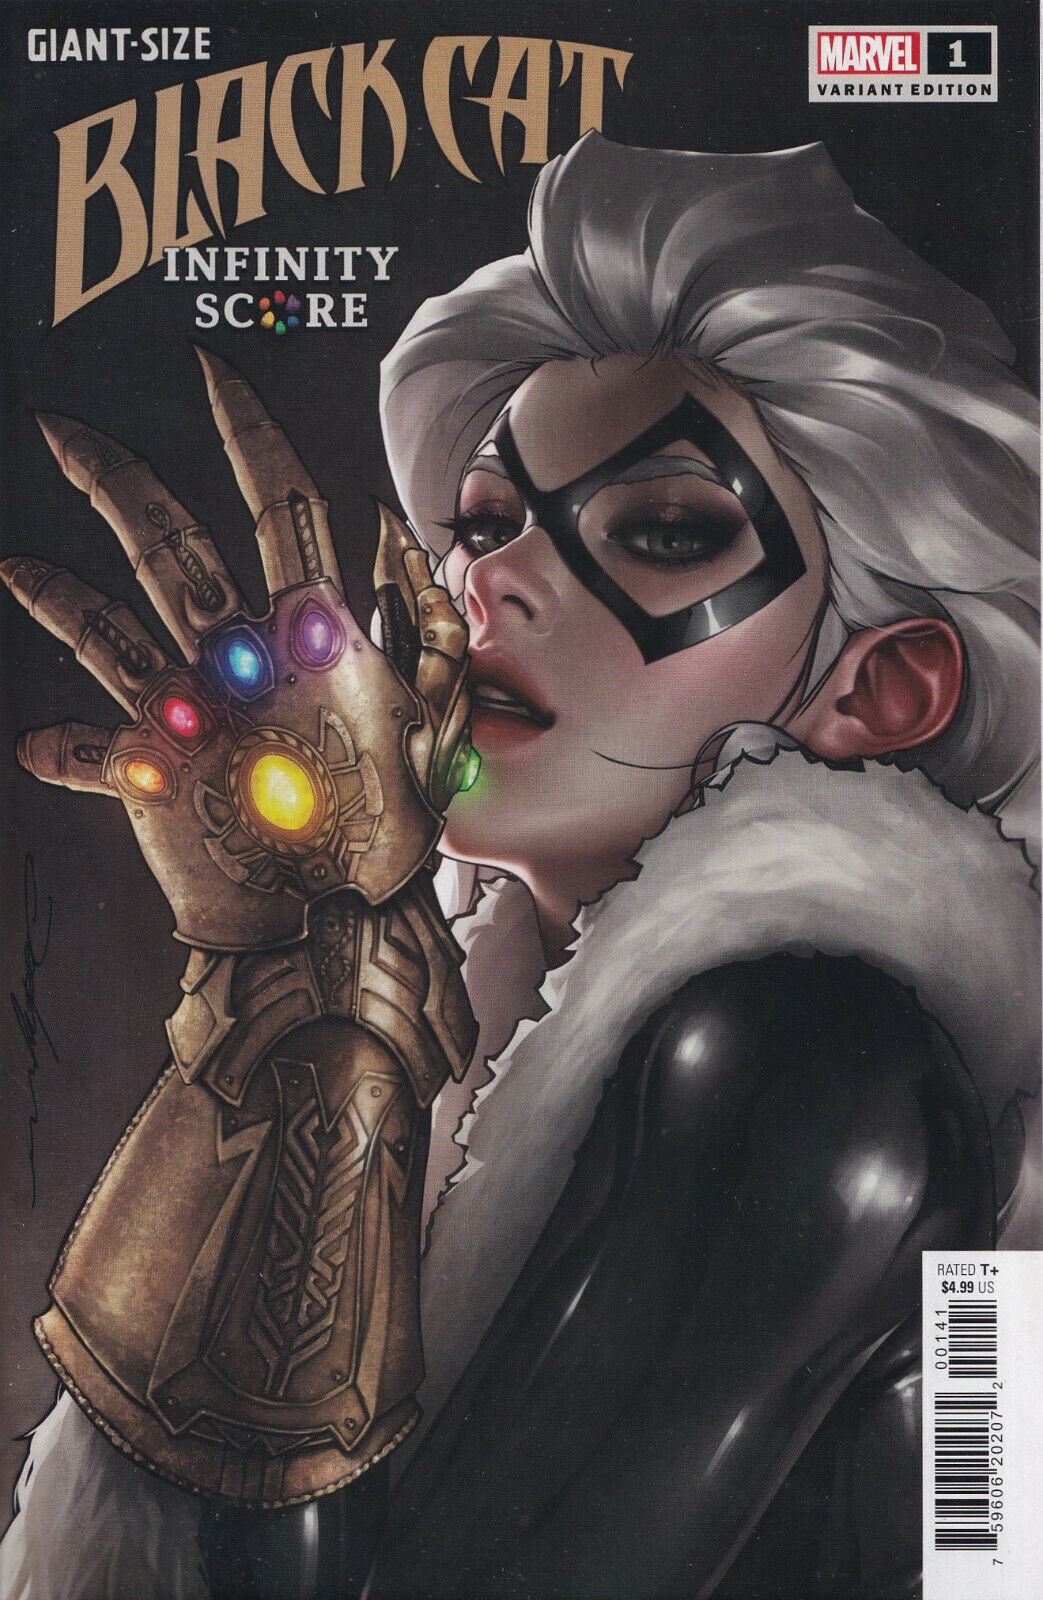 BLACK CAT: INFINITY SCORE #1 (JEEHYUNG LEE EXCLUSIVE VARIANT)(2021) ~ Marvel